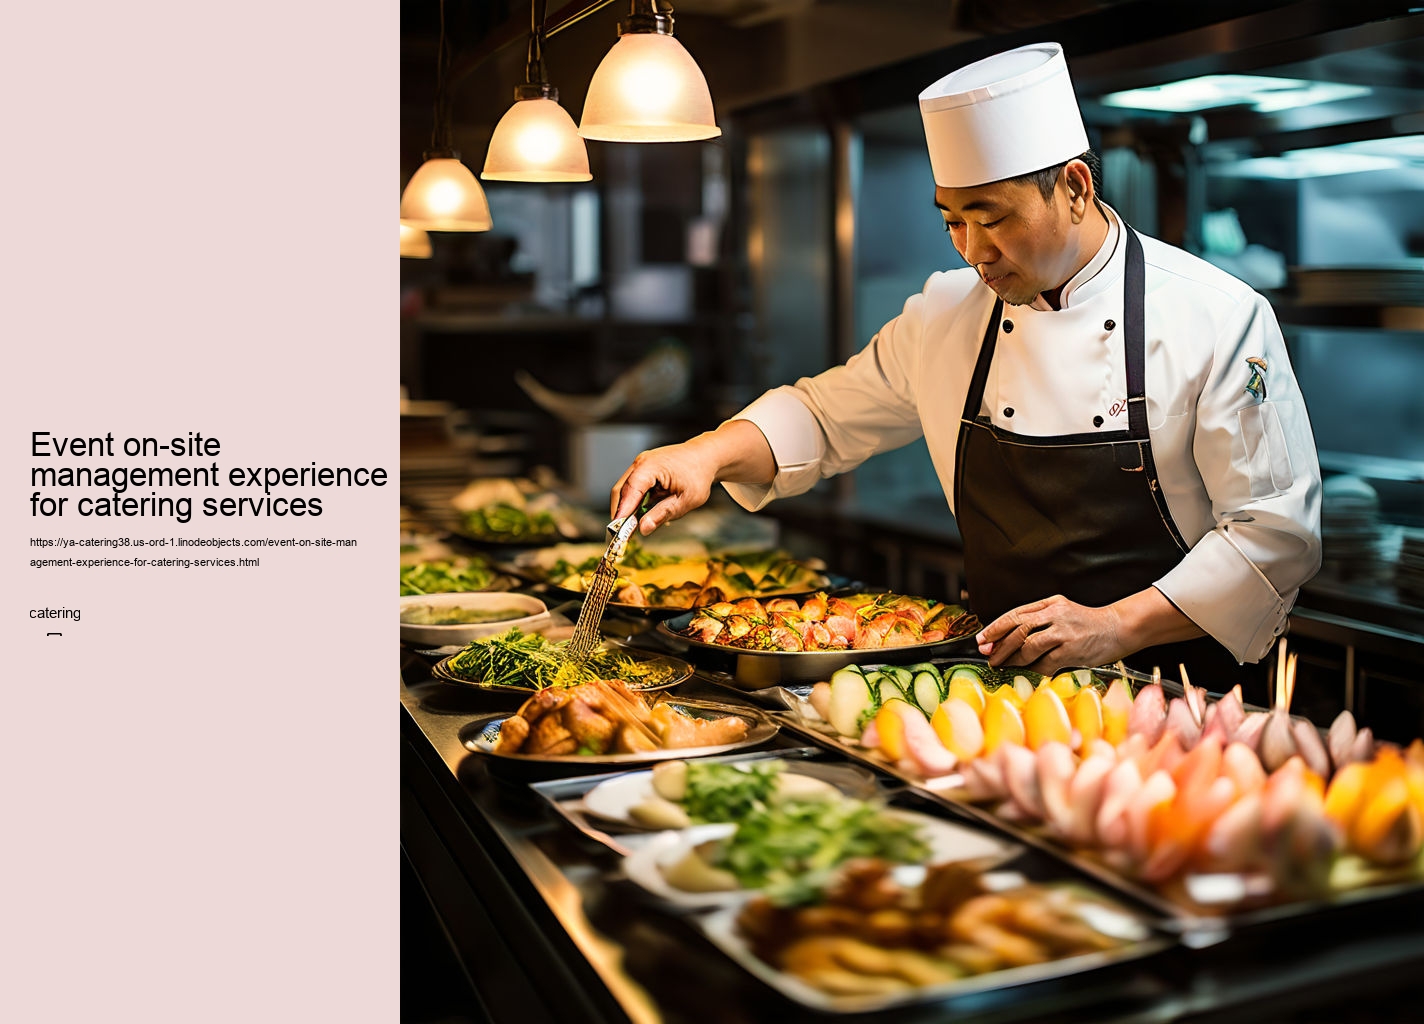 Event on-site management experience for catering services